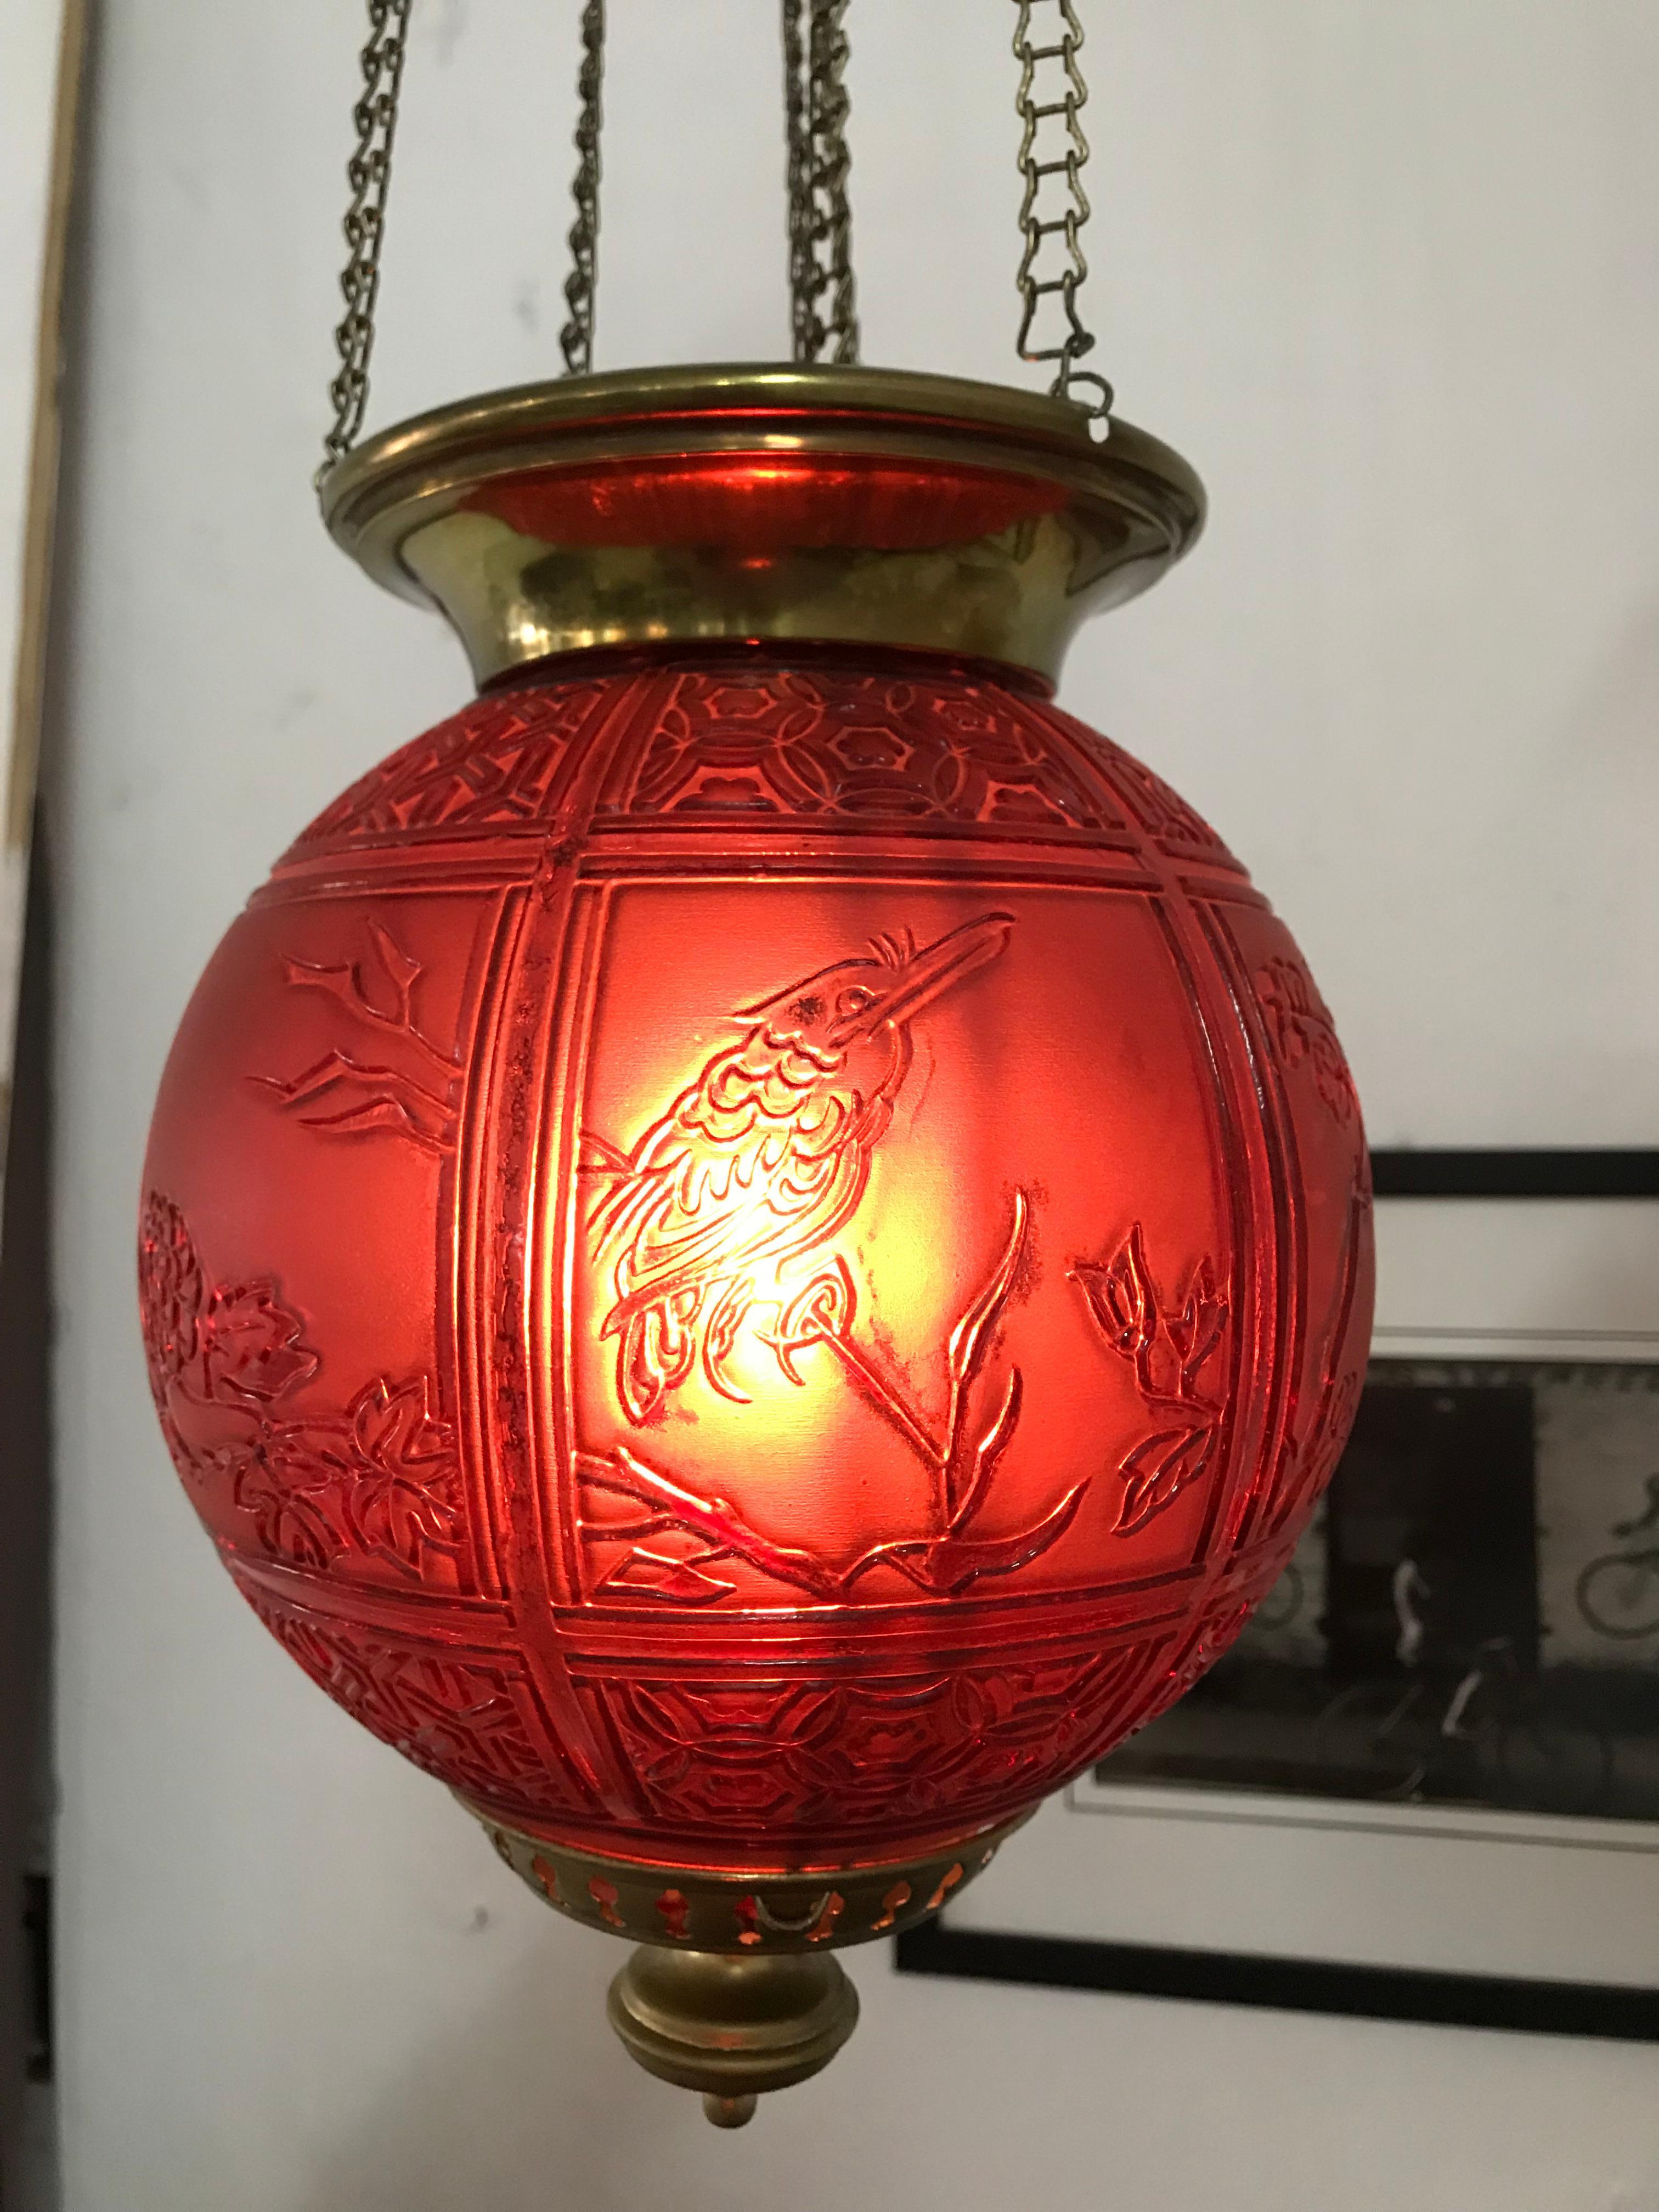 Late 19th or early 20th century ruby red glass lantern by Baccarat, France, unsigned but a well documented model.
It has 3 panels depicting a kingfisher in different motions.
At the moment it can hold a candle (we recommend using battery operated